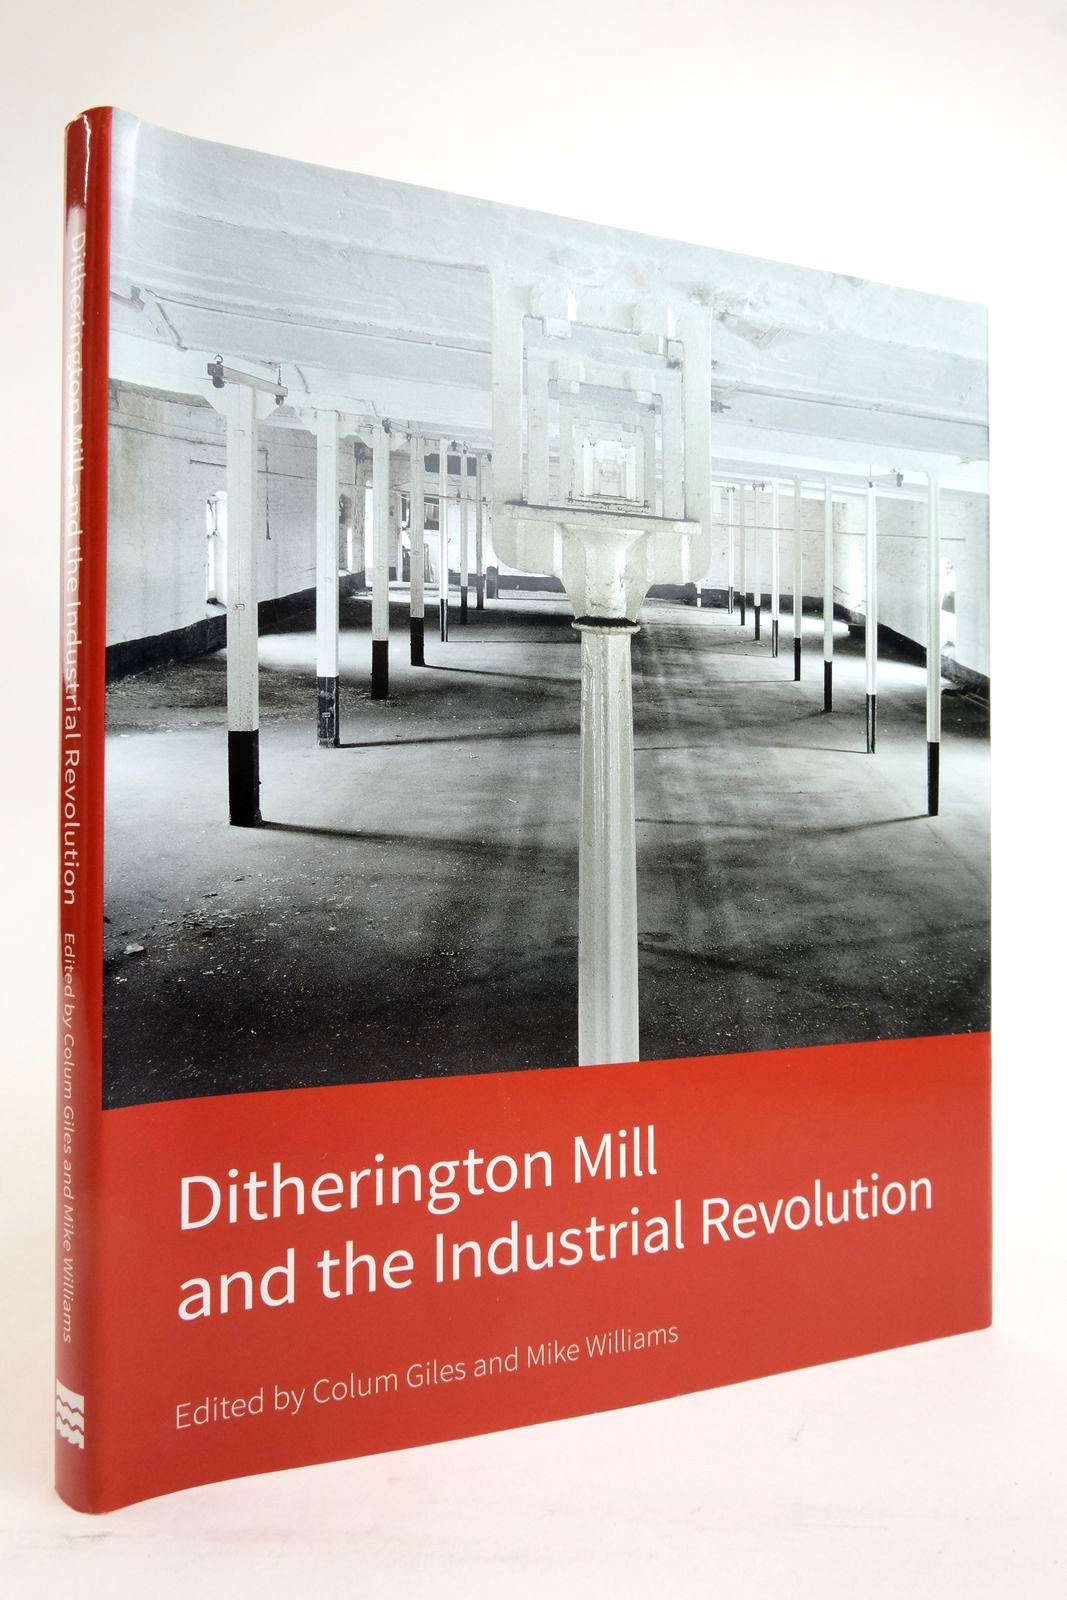 Photo of DITHERINGTON MILL AND THE INDUSTRIAL REVOLUTION written by Giles, Colum Williams, Mike et al, published by Historic England (STOCK CODE: 2136381)  for sale by Stella & Rose's Books